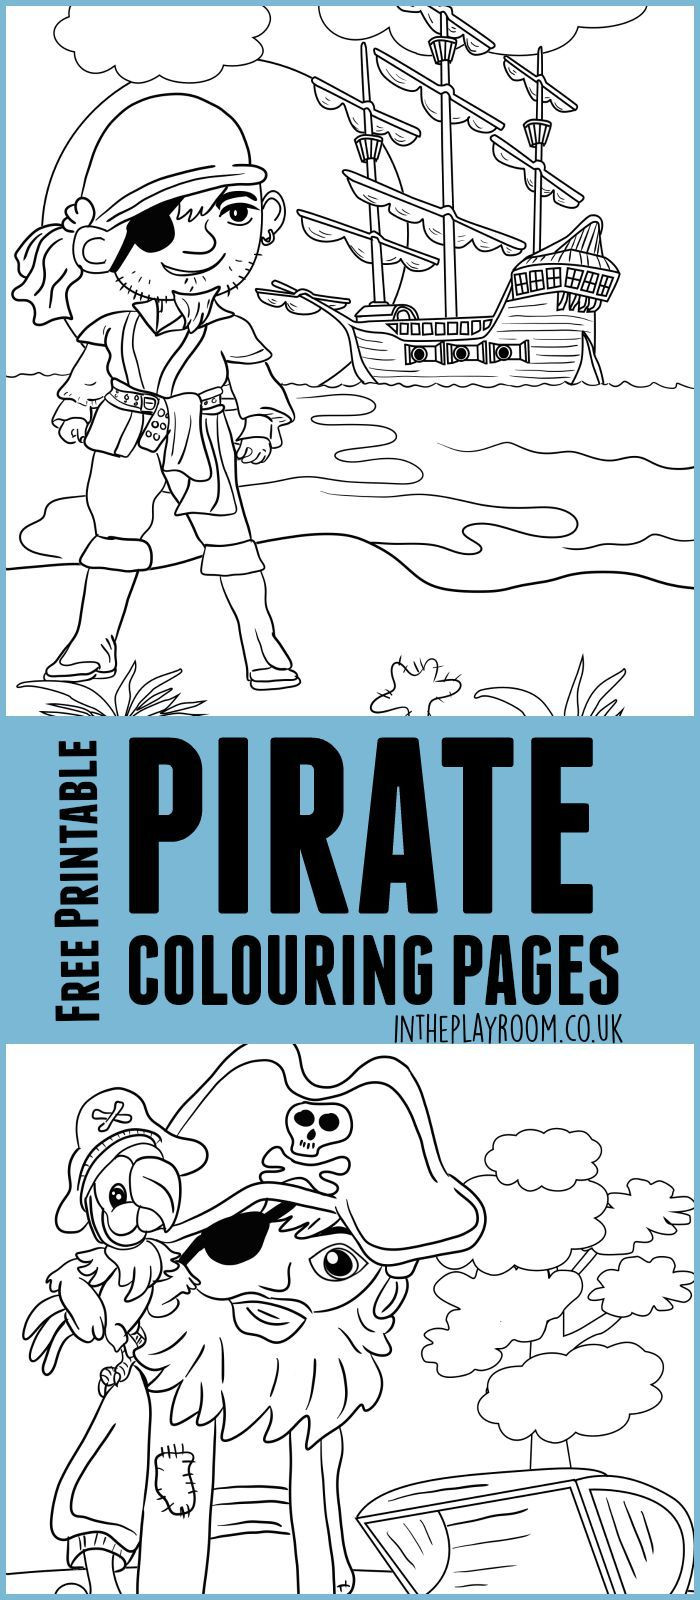 Pirate Coloring Pages Kids
 Pirate Colouring Pages for Kids In The Playroom